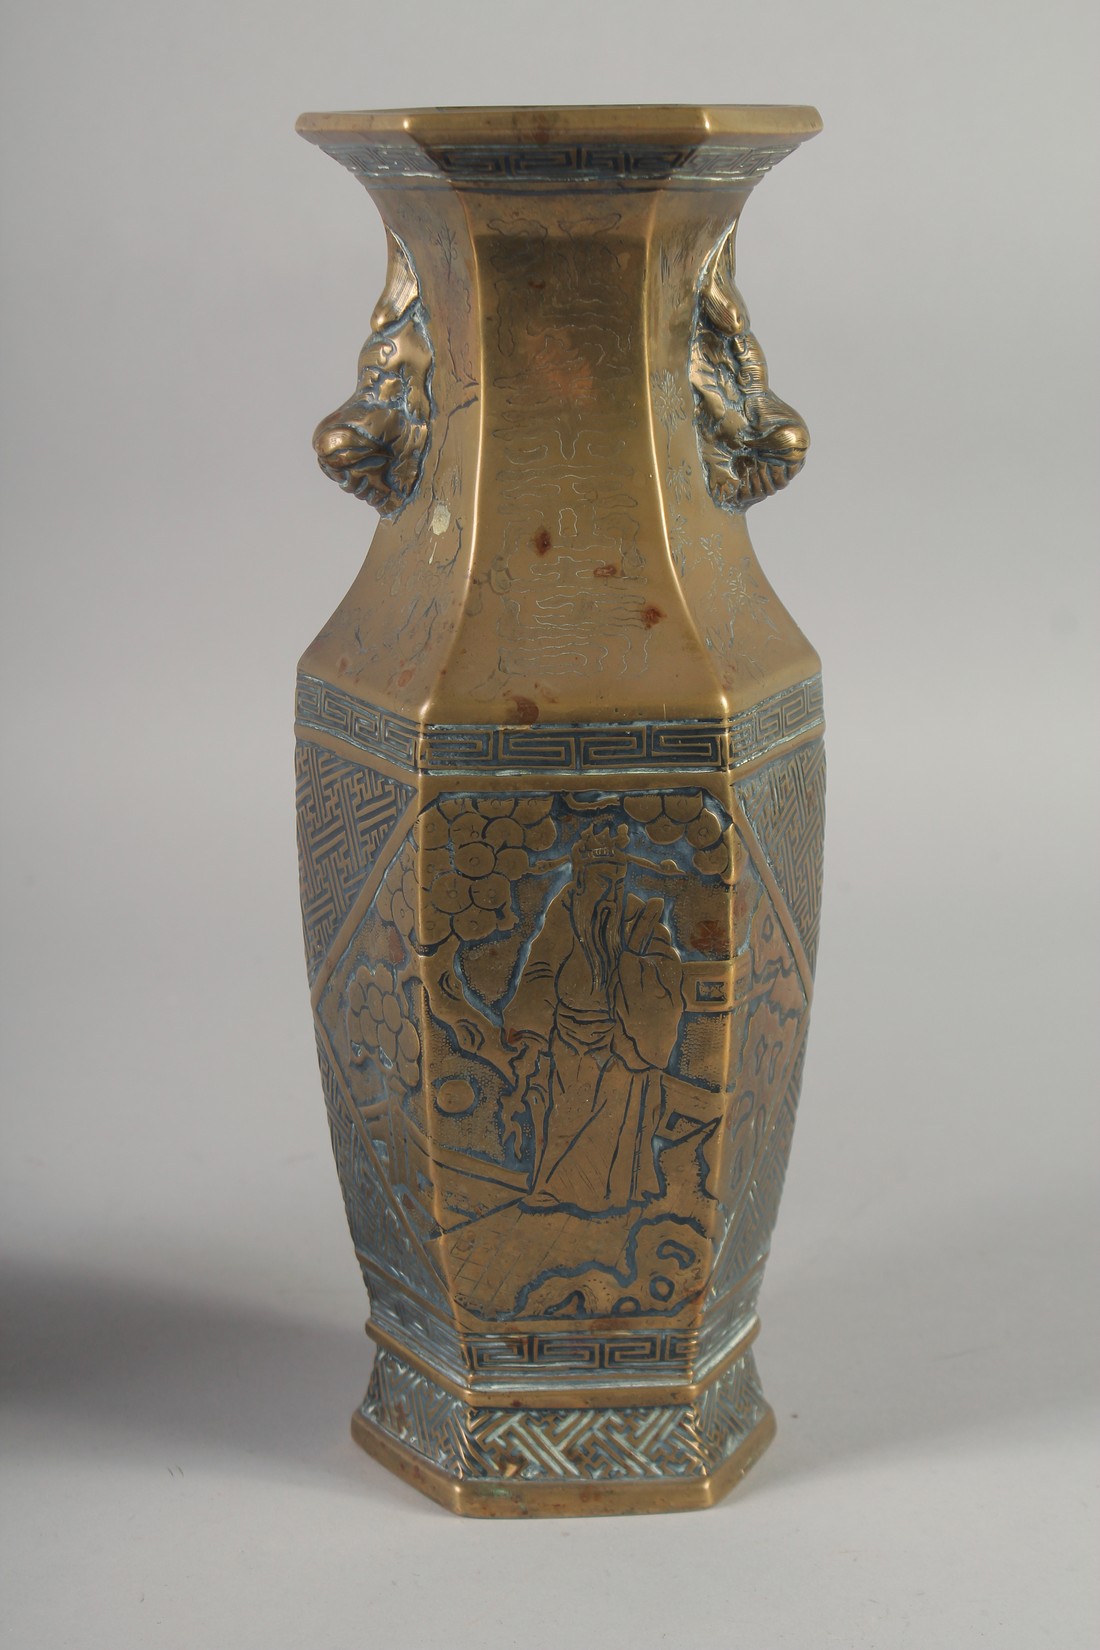 A PAIR OF 19TH CENTURY CHINESE BRONZE HEXAGONAL VASES, engraved with figures and with twin lion - Image 6 of 6